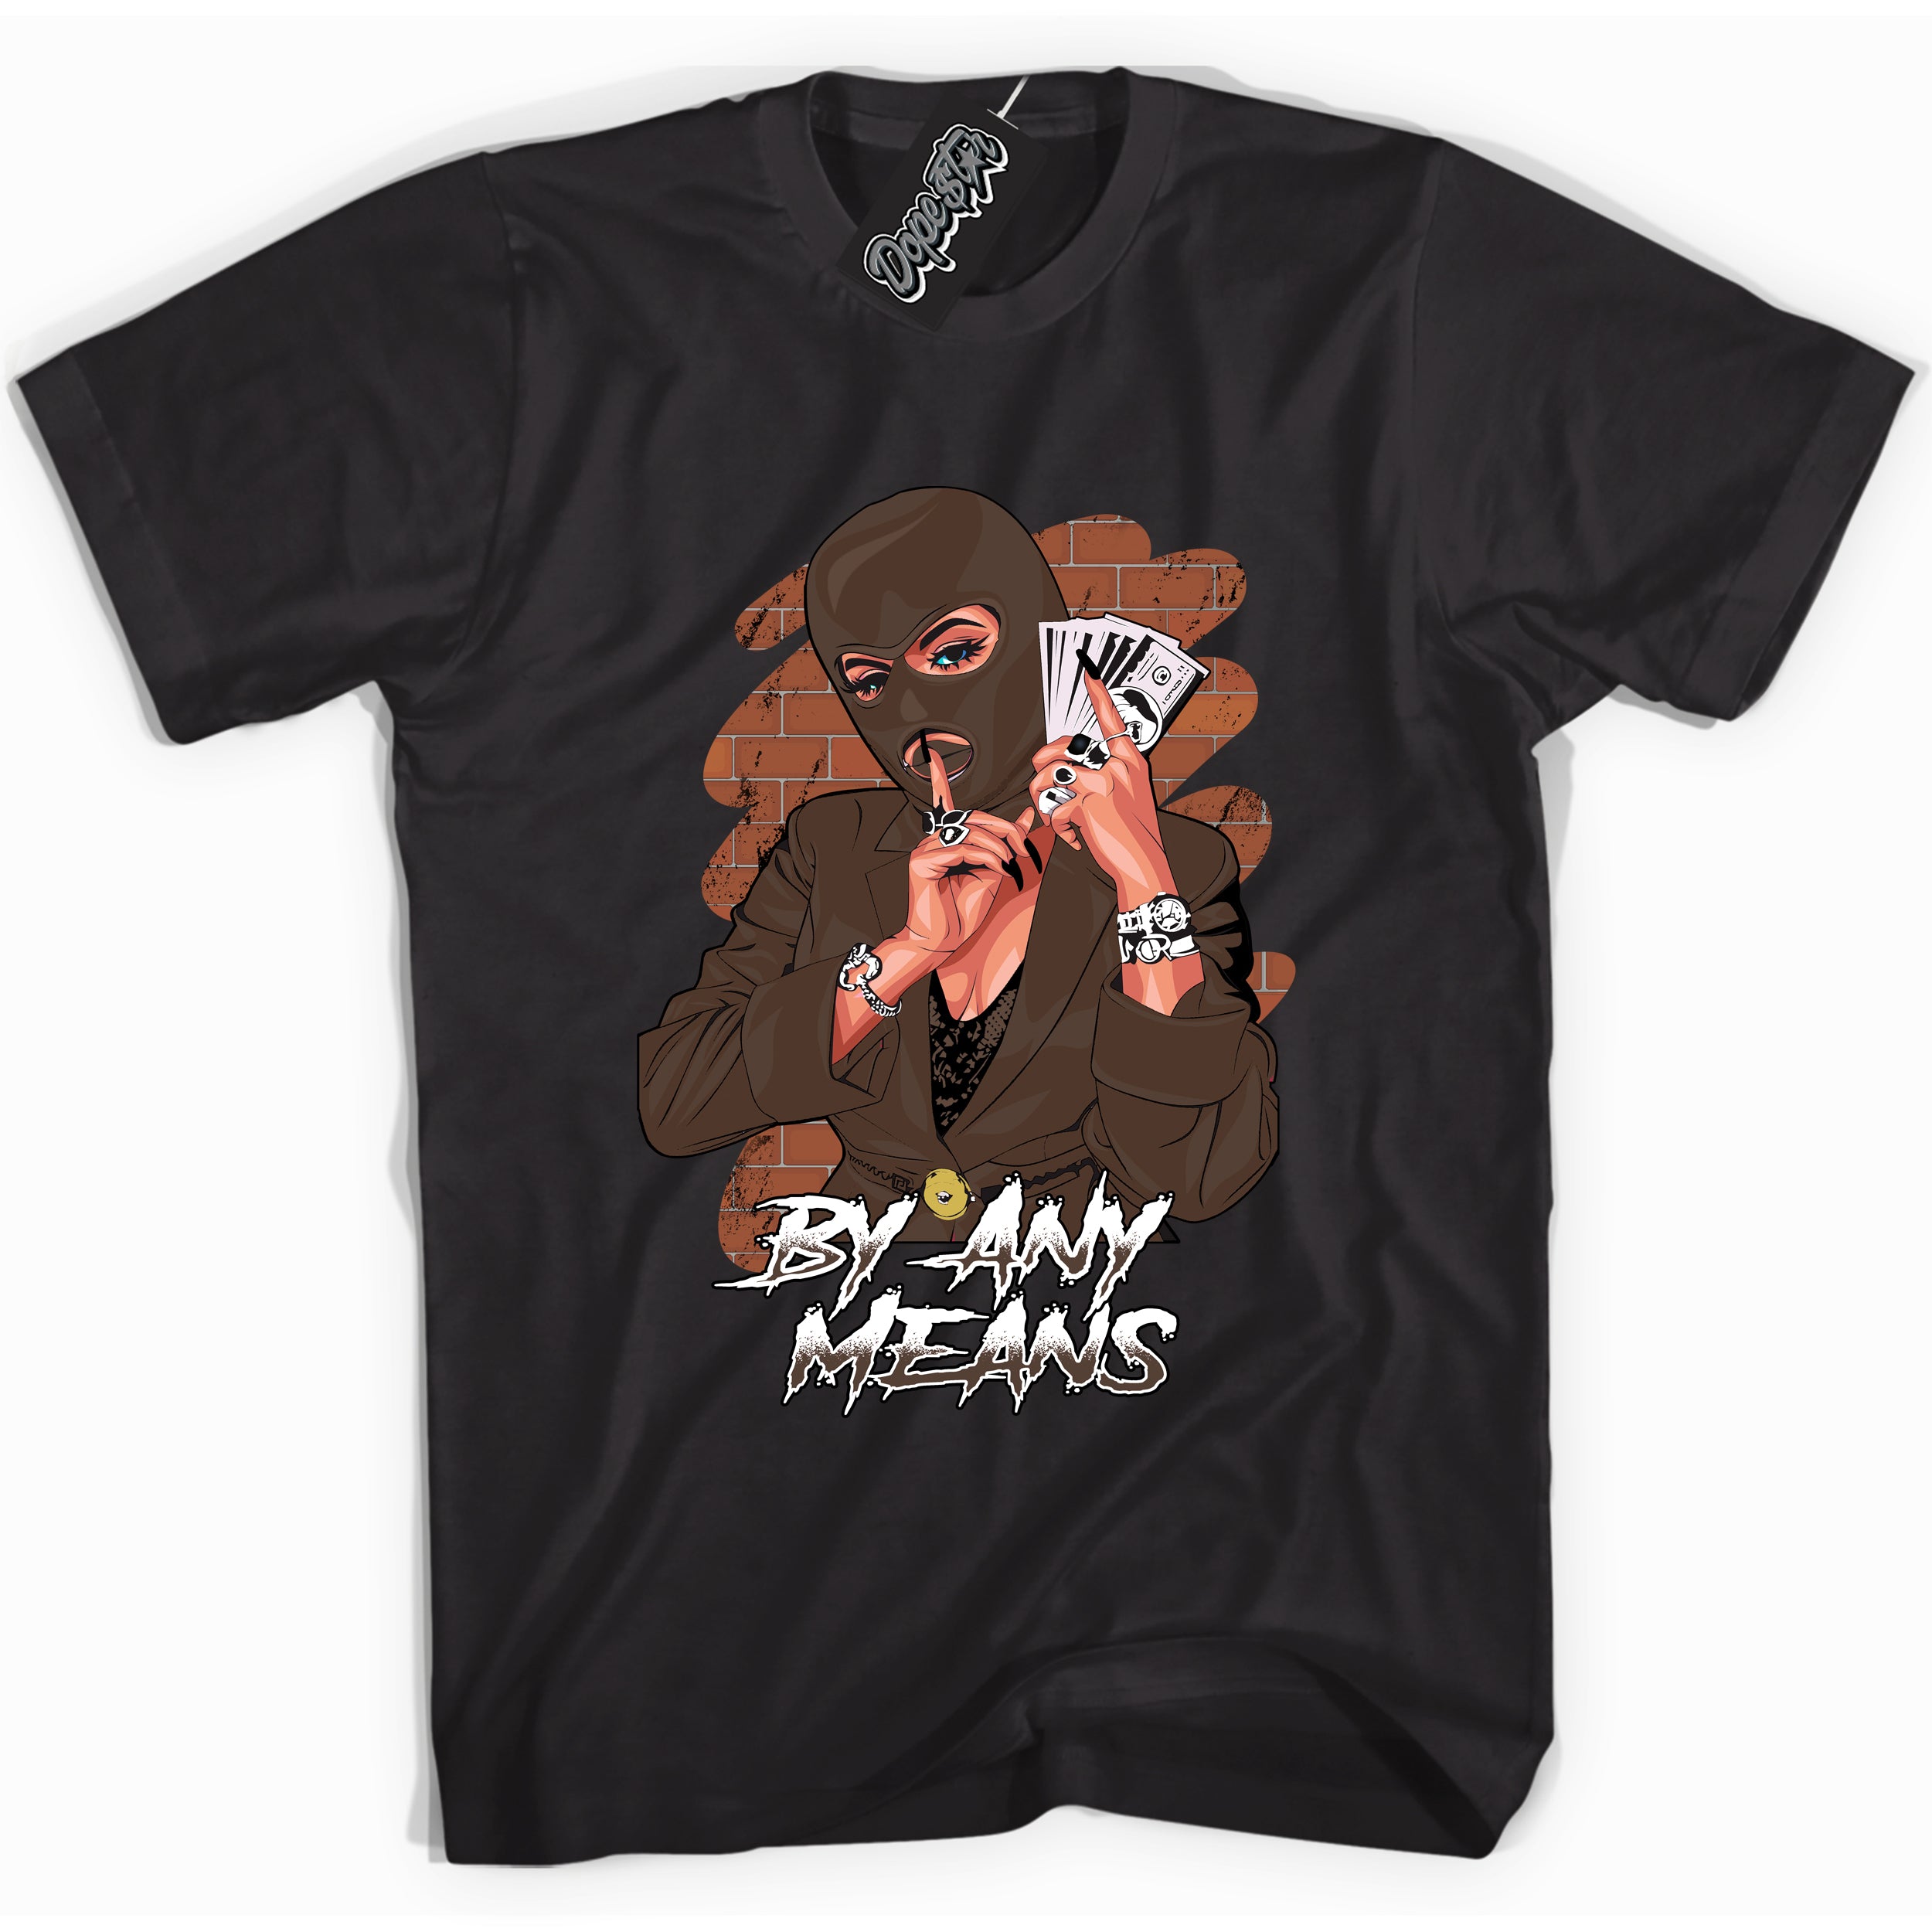 Cool Black graphic tee with “ By Any Means ” design, that perfectly matches Palomino 1s sneakers 